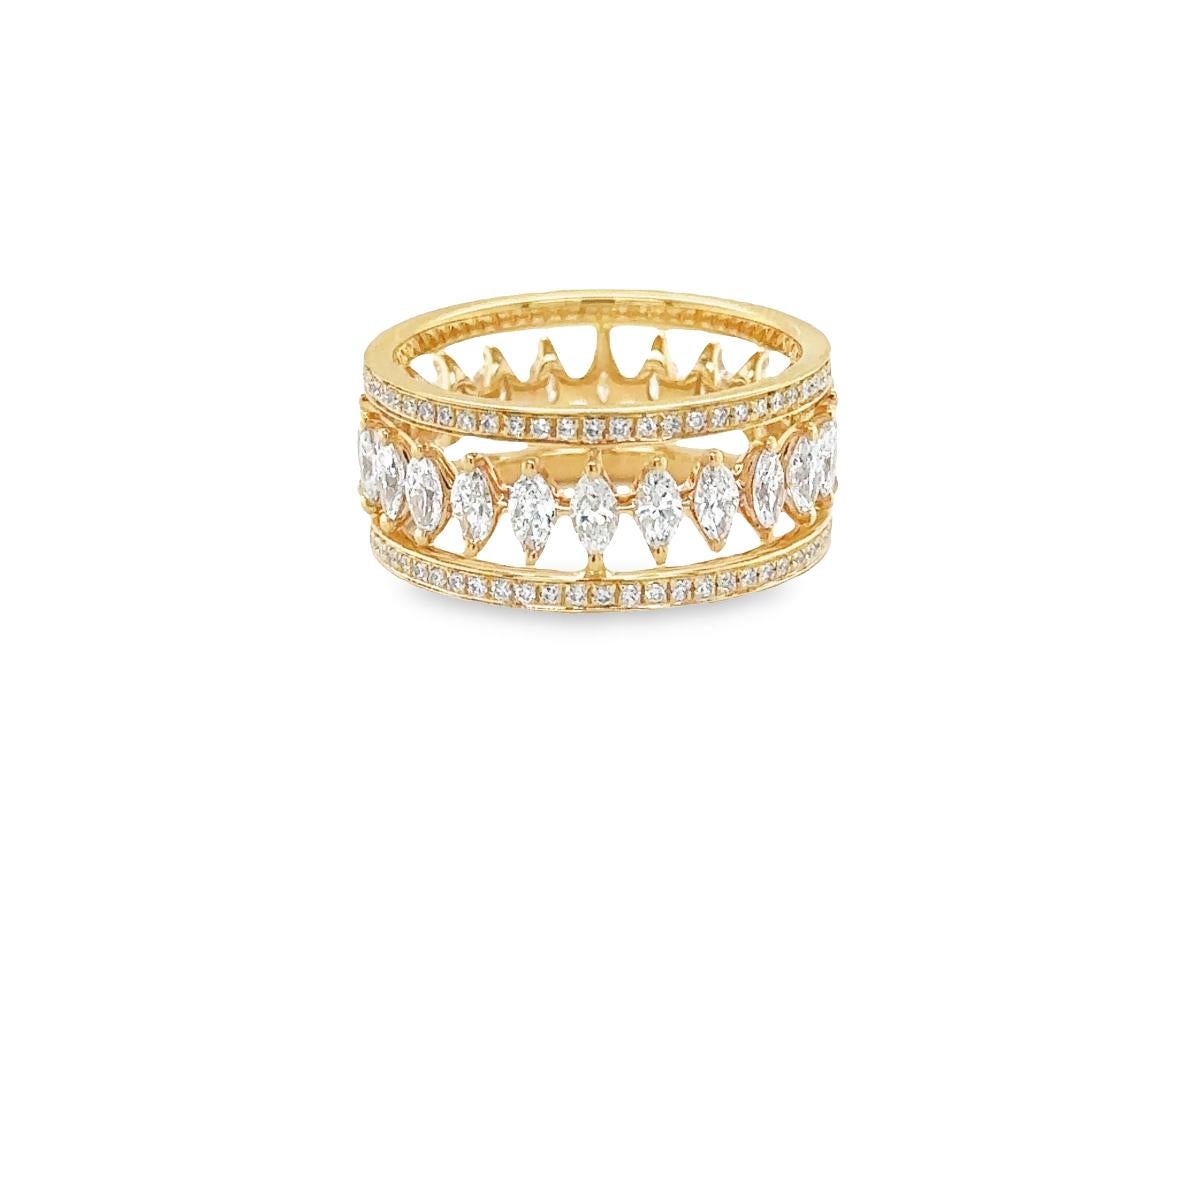 Presenting the ANNIVERSARY Ring, crafted in 18Kt yellow gold with a weight of 4.98 grams. This ring features striking Marquise Diamonds with G color and VS clarity, totaling 1.37 carats, along with additional Diamonds of G color and VS clarity,